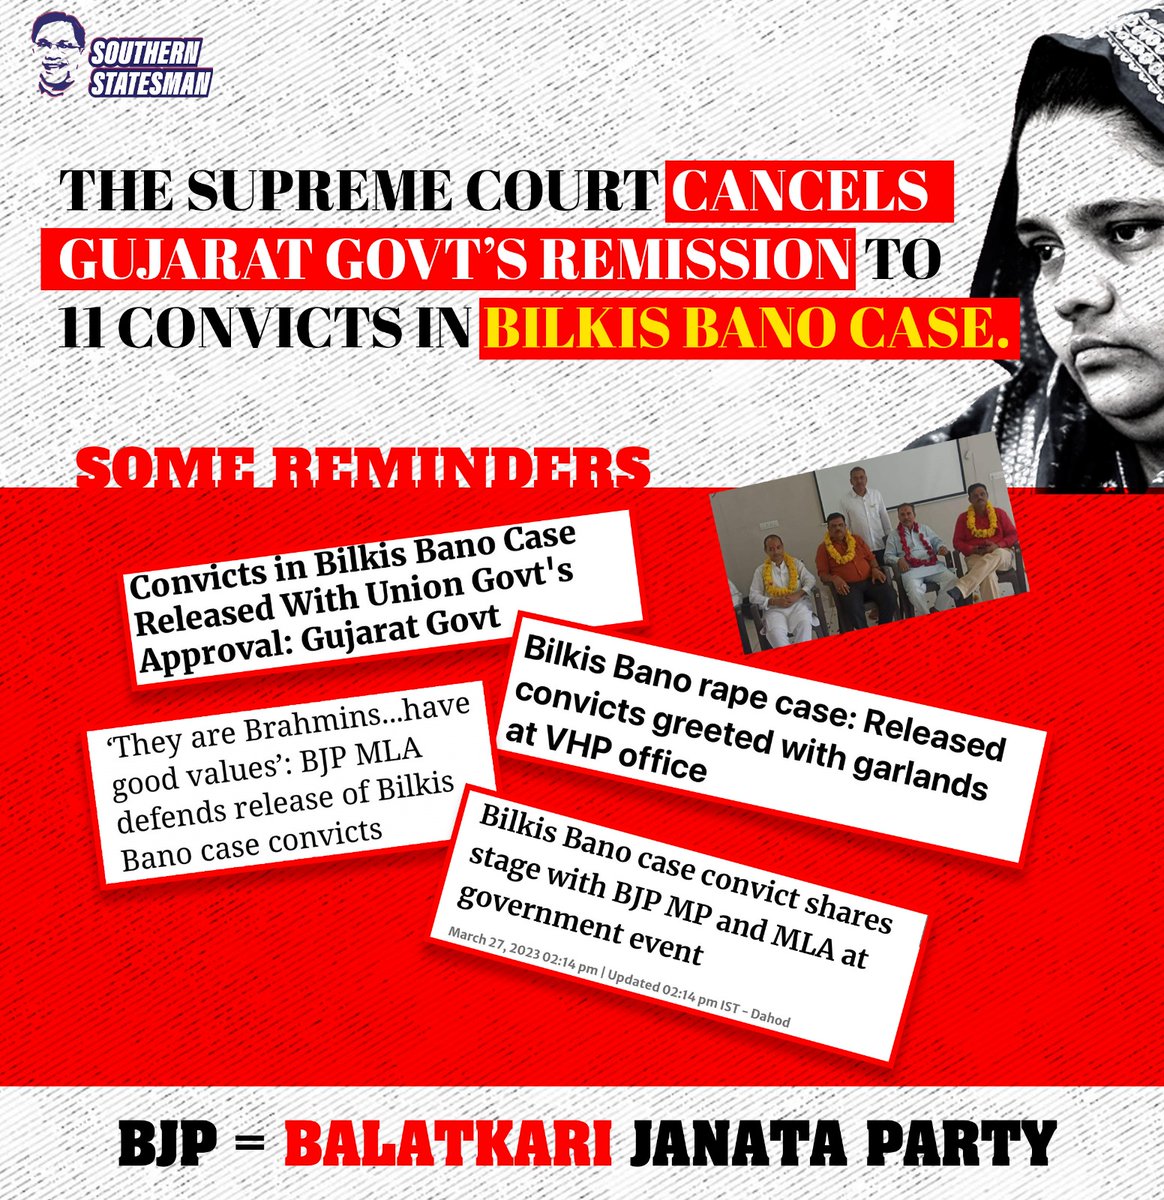 When these convicts were out for more than a year, the BJP and Sangh Parivar groups celebrated them!!

Hence we call the BJP - #BalatkariJanataParty

#BilkisBano #remission #gujarat #gujaratgovt #gangrape #2002gujaratriots #BJP #SupremeCourt